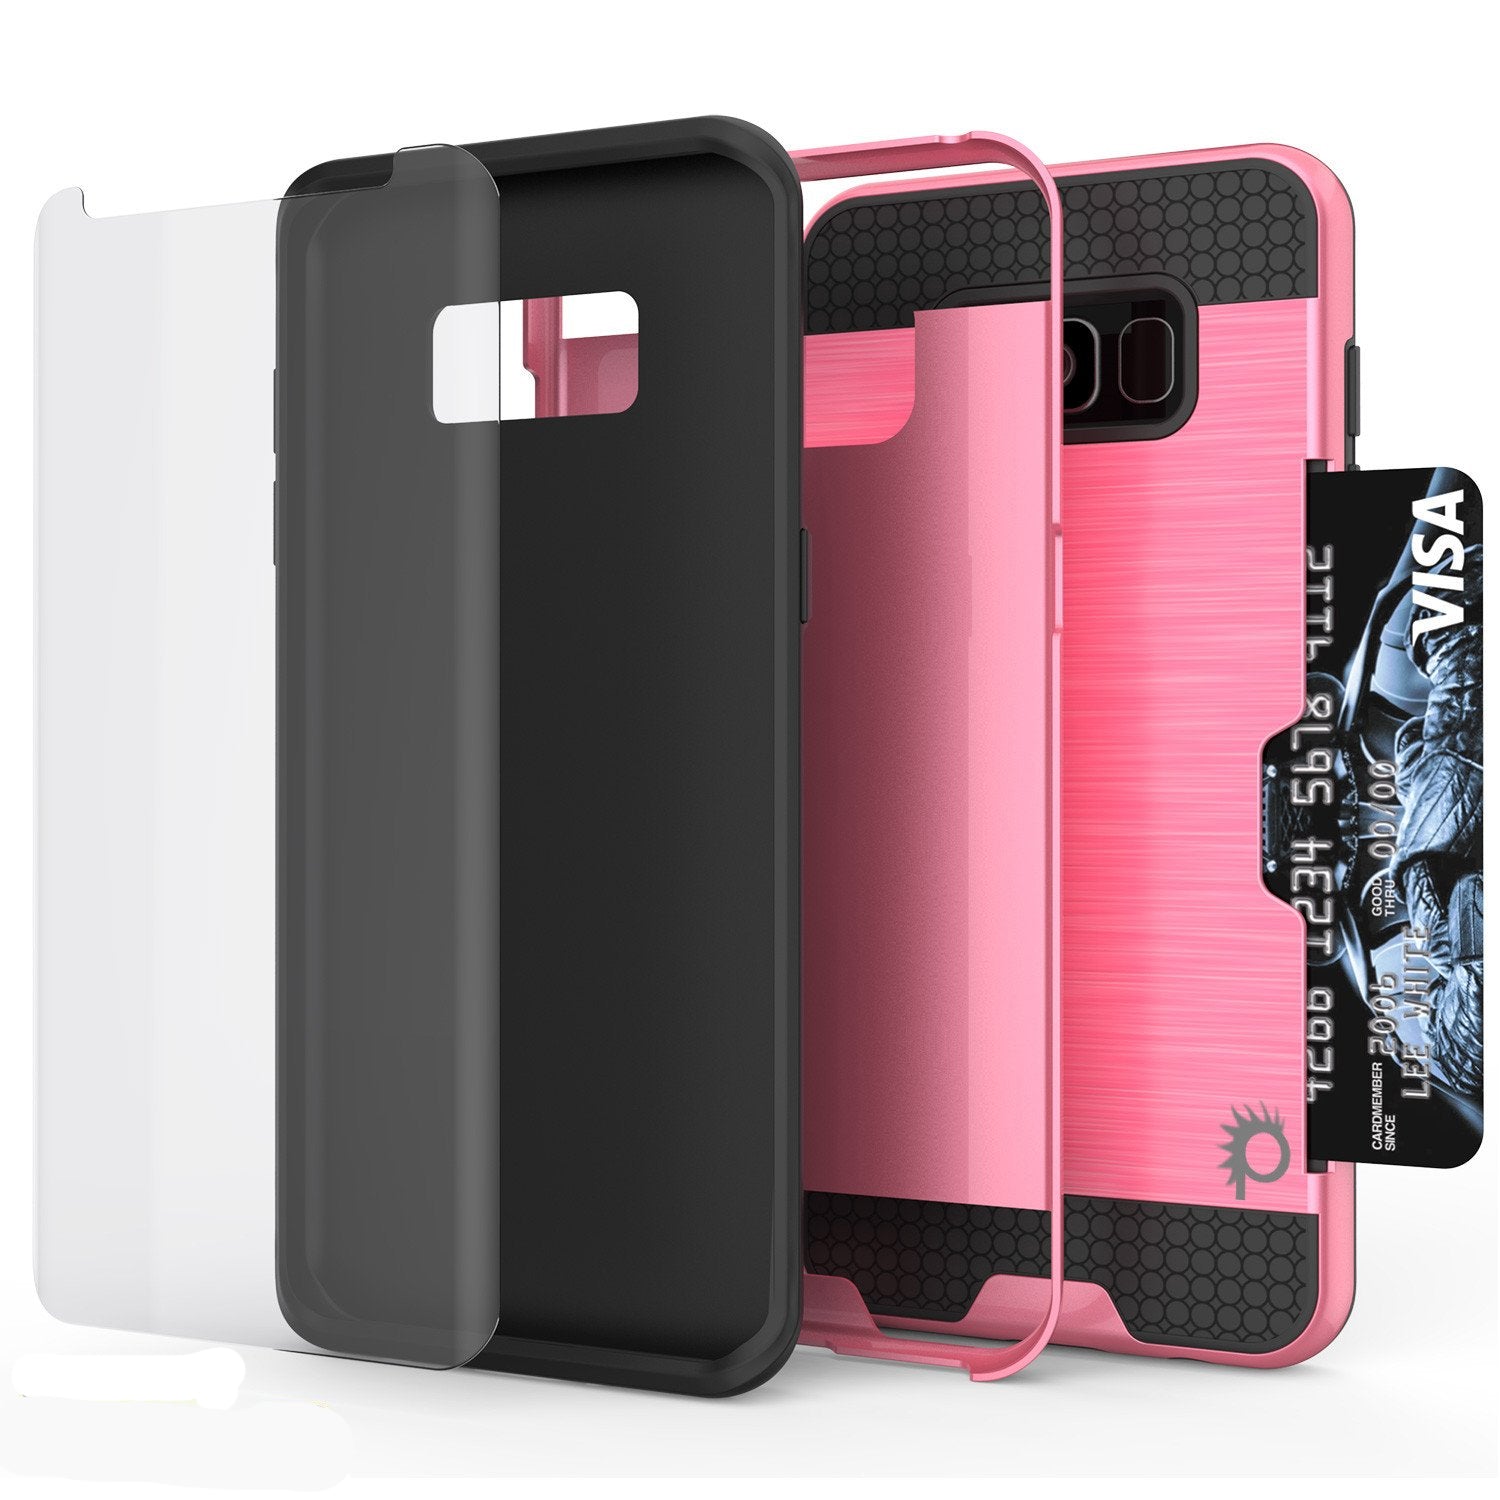 Galaxy S8 Case, PUNKcase [SLOT Series] Dual-Layer Armor Cover w/Integrated Anti-Shock System, Credit Card Slot & Screen Protector [Pink]